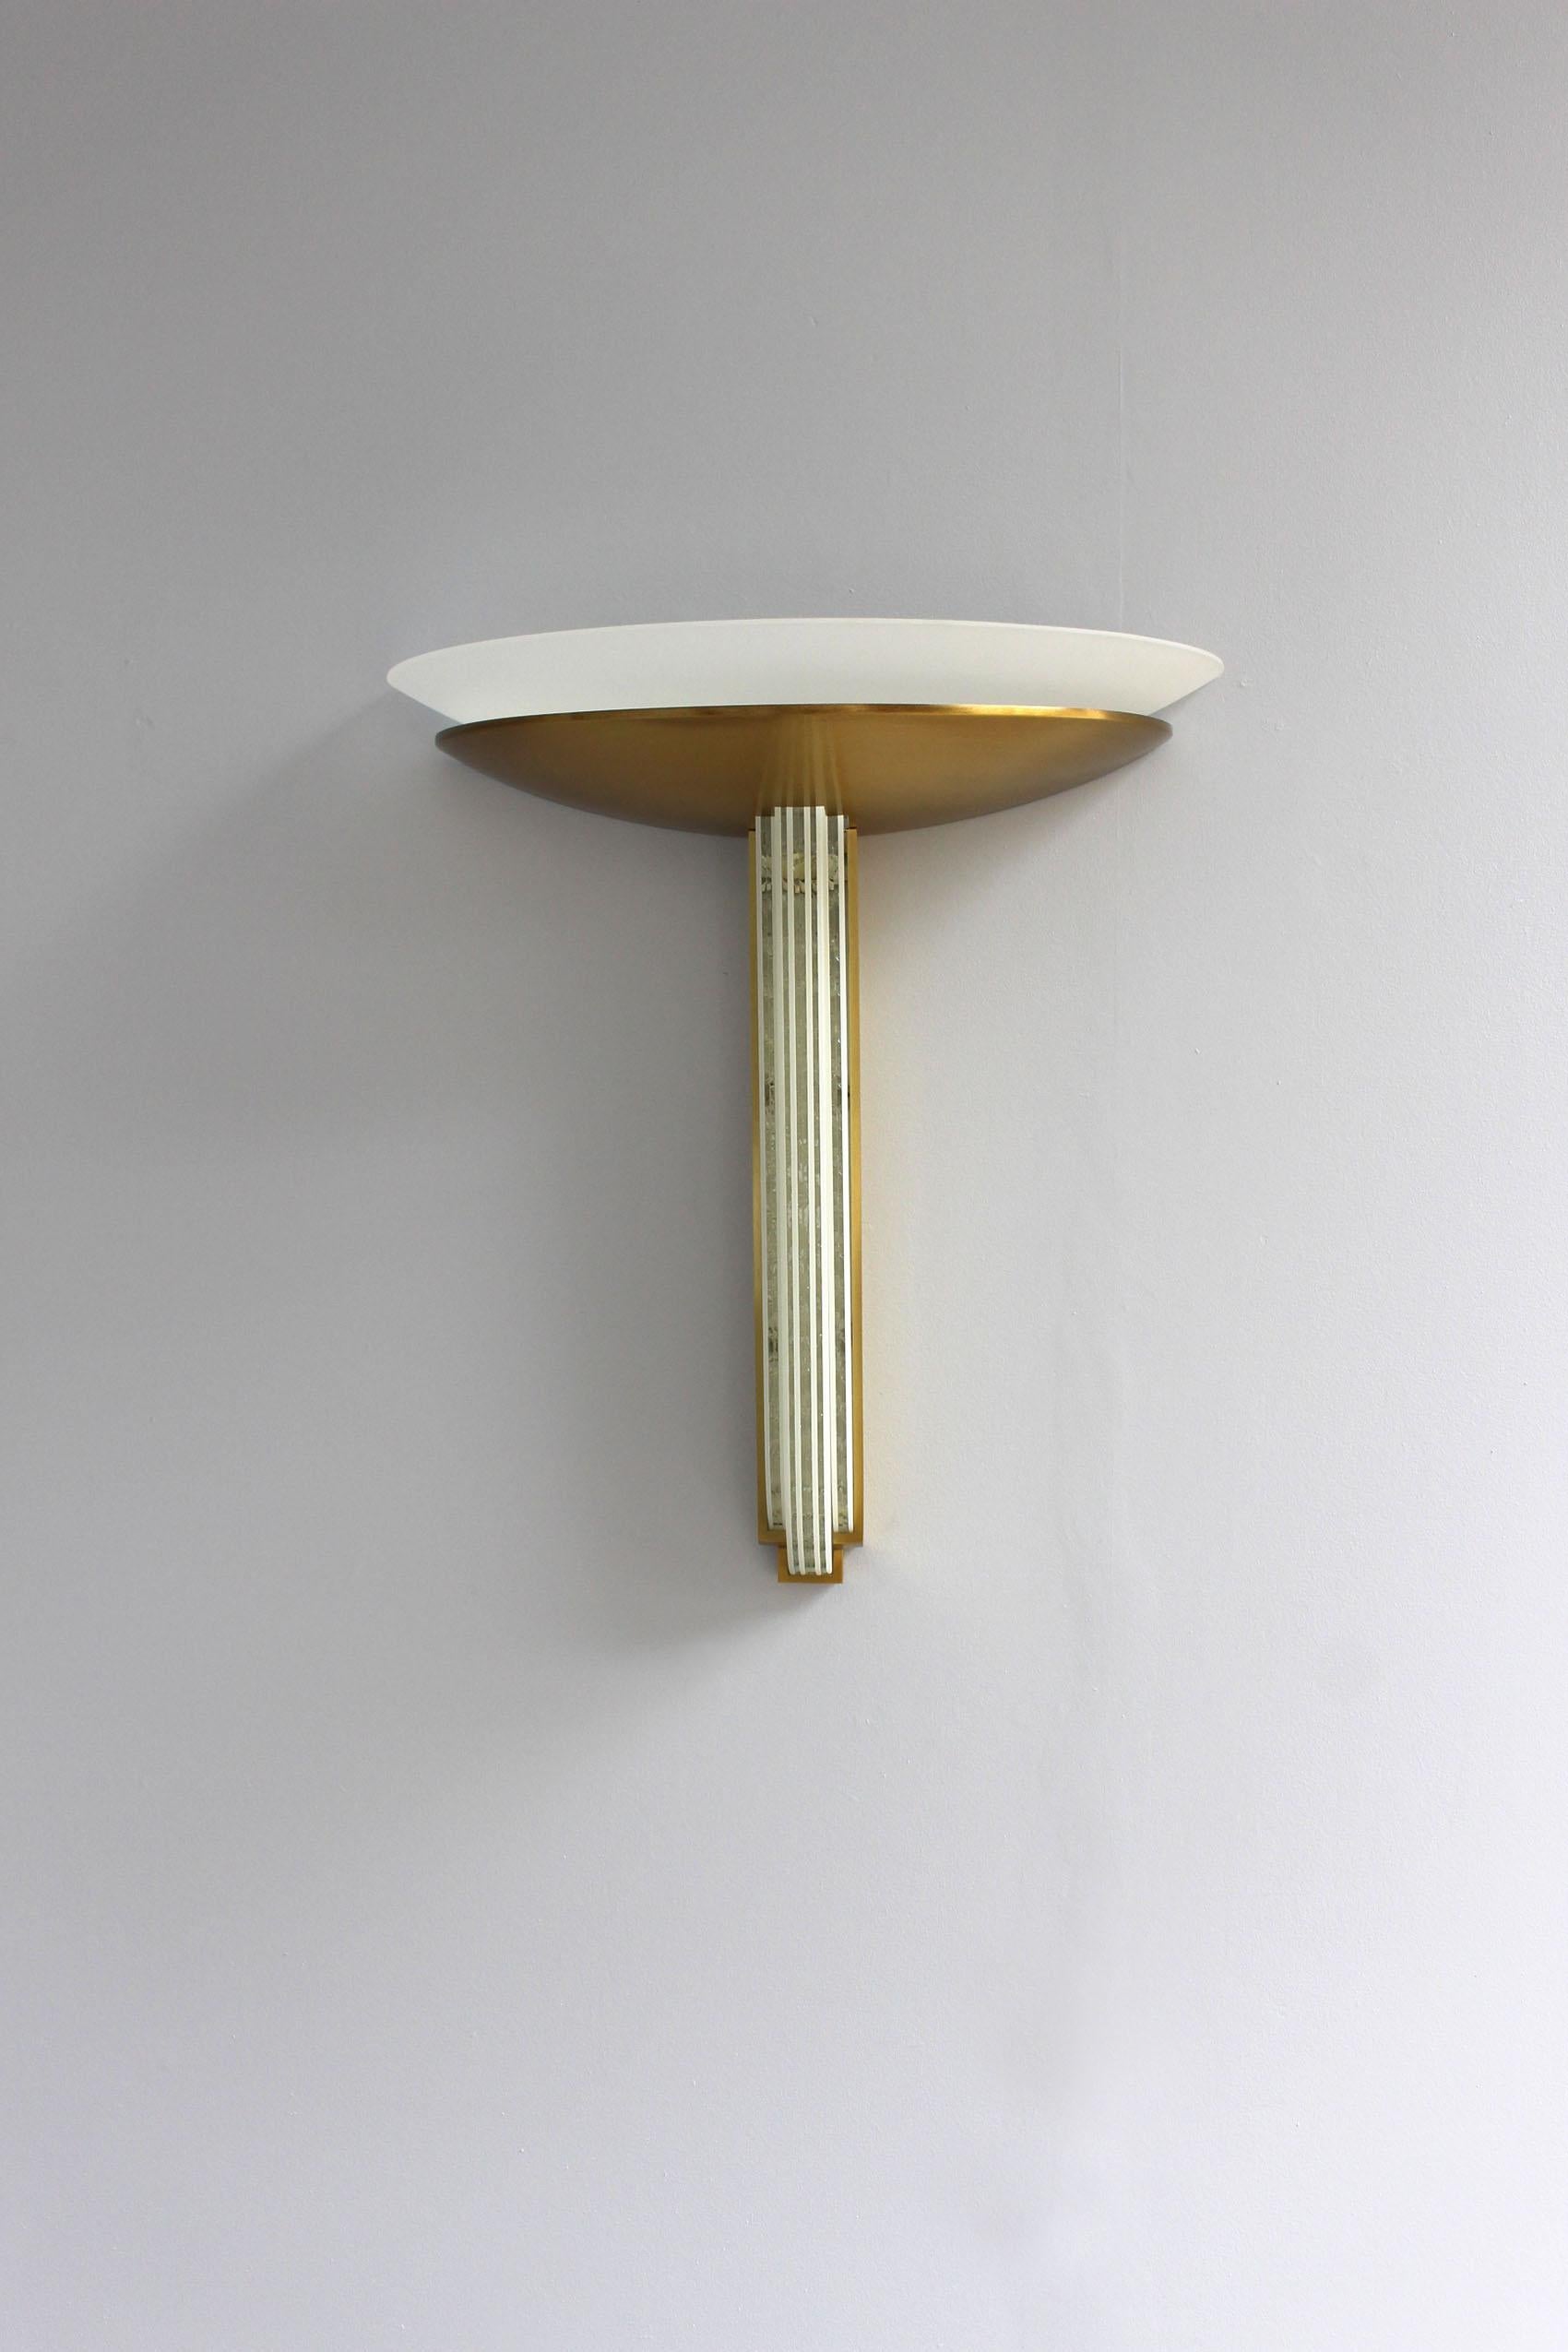 Jean Perzel - A fine French Art Deco sconce made with vertical diamond cut-glass slabs outlined by a bronze mount and a bronze bowl that supports a white frosted glass diffuser.
This wall light adorned the grand luxury cabin on the cruise liner